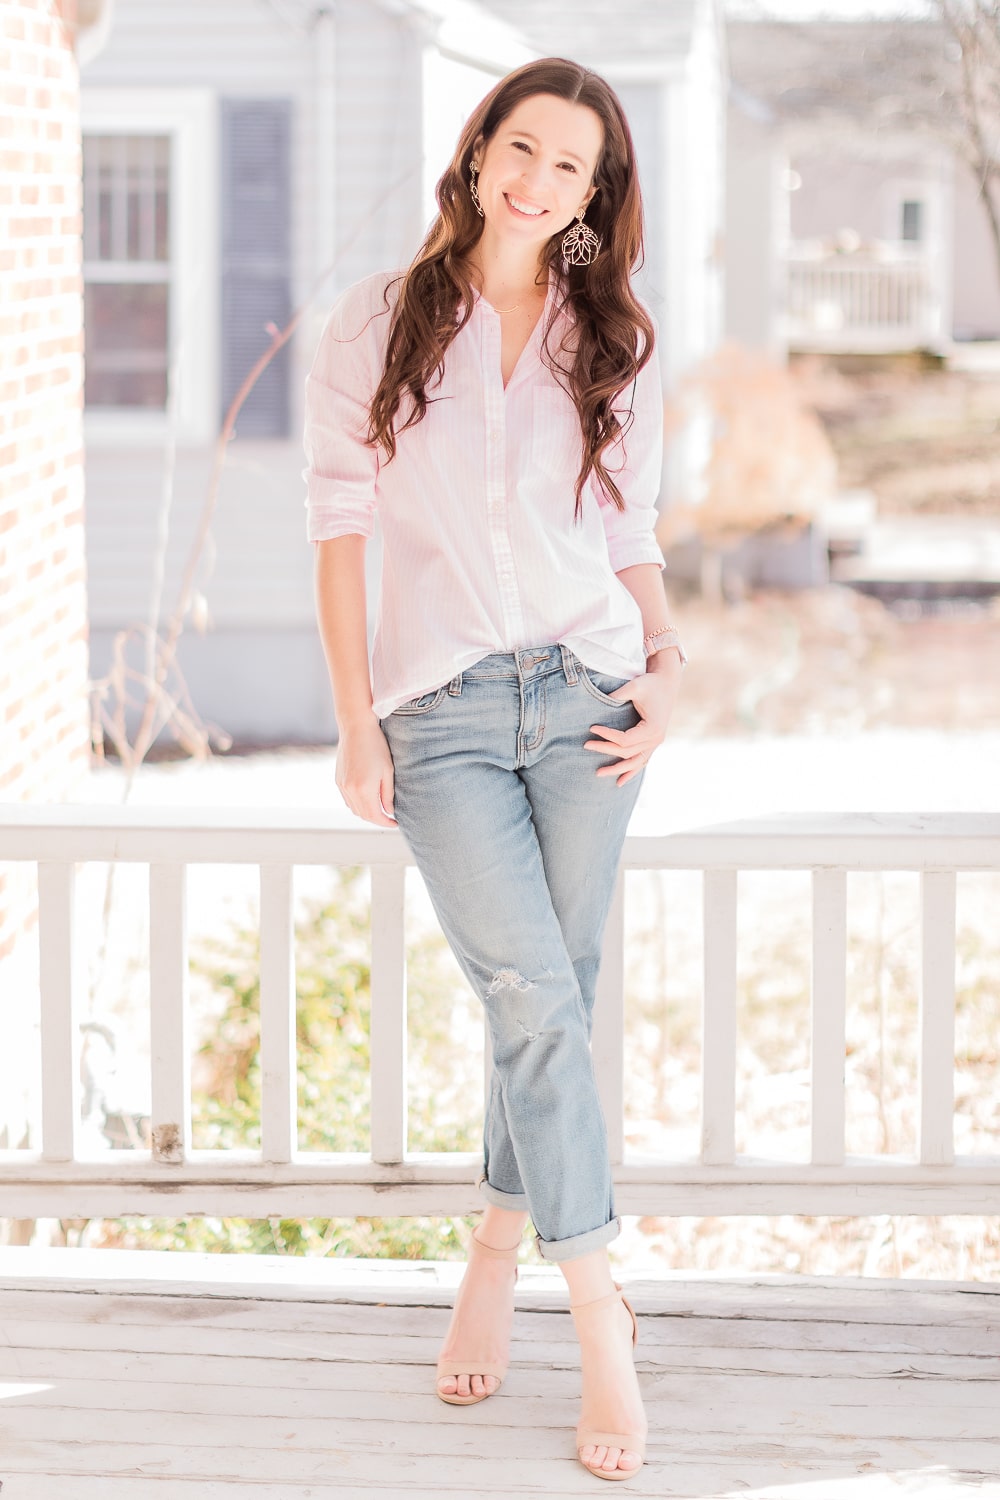 Girlfriend jeans outfit styled for Valentine's Day by affordable fashion blogger Stephanie Ziajka of Diary of a Debutante